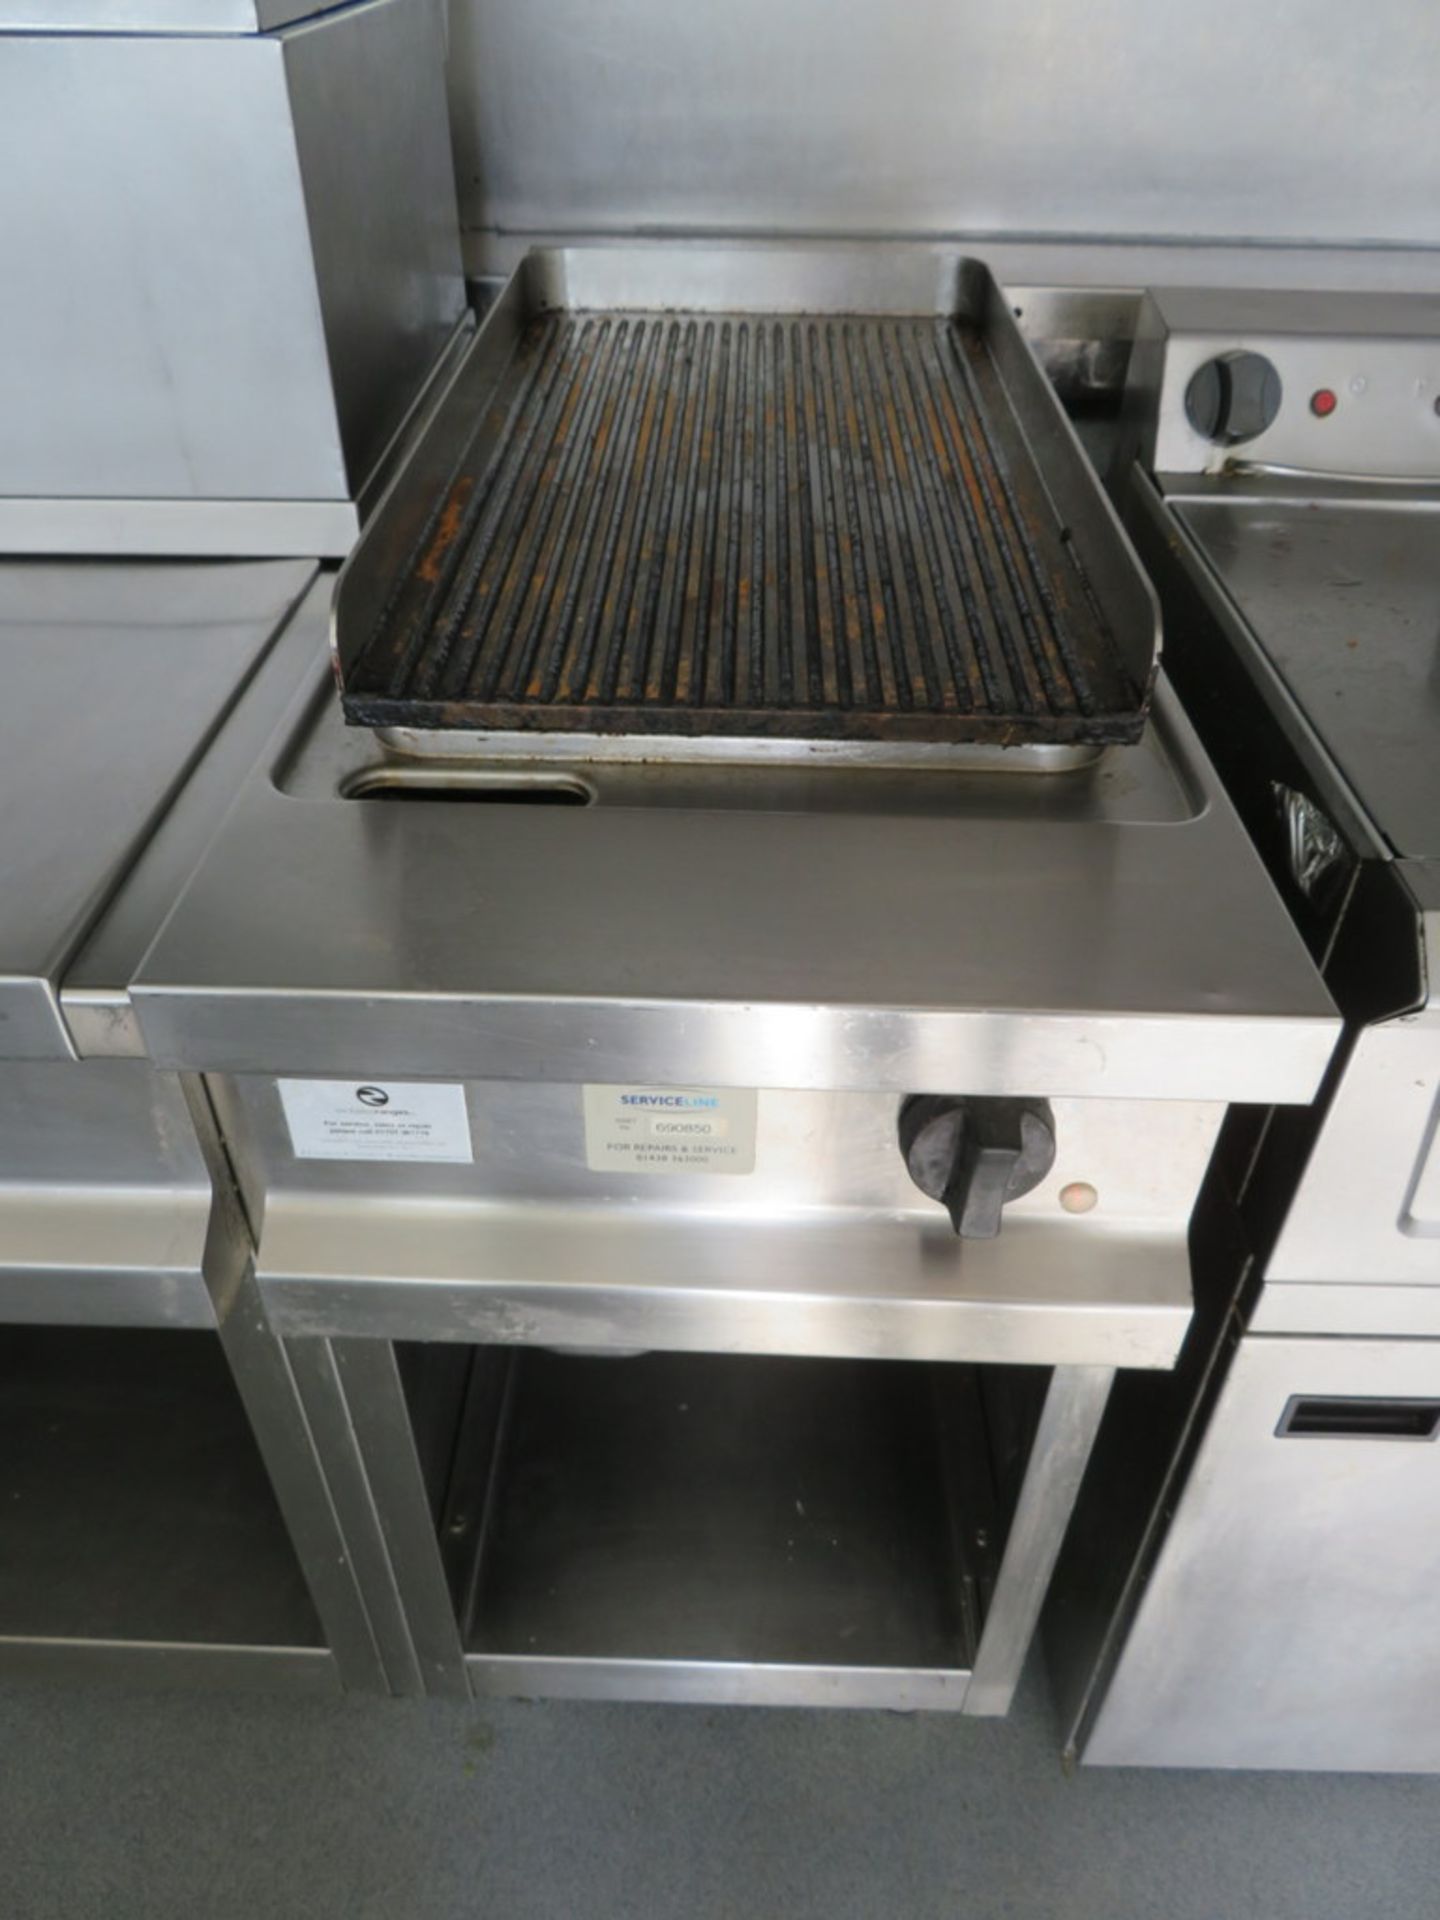 EXCLUSIVE RANGES MODEL EHE 80 STAINLESS STEEL COMMERCIAL COOKING RANGE - Image 6 of 10